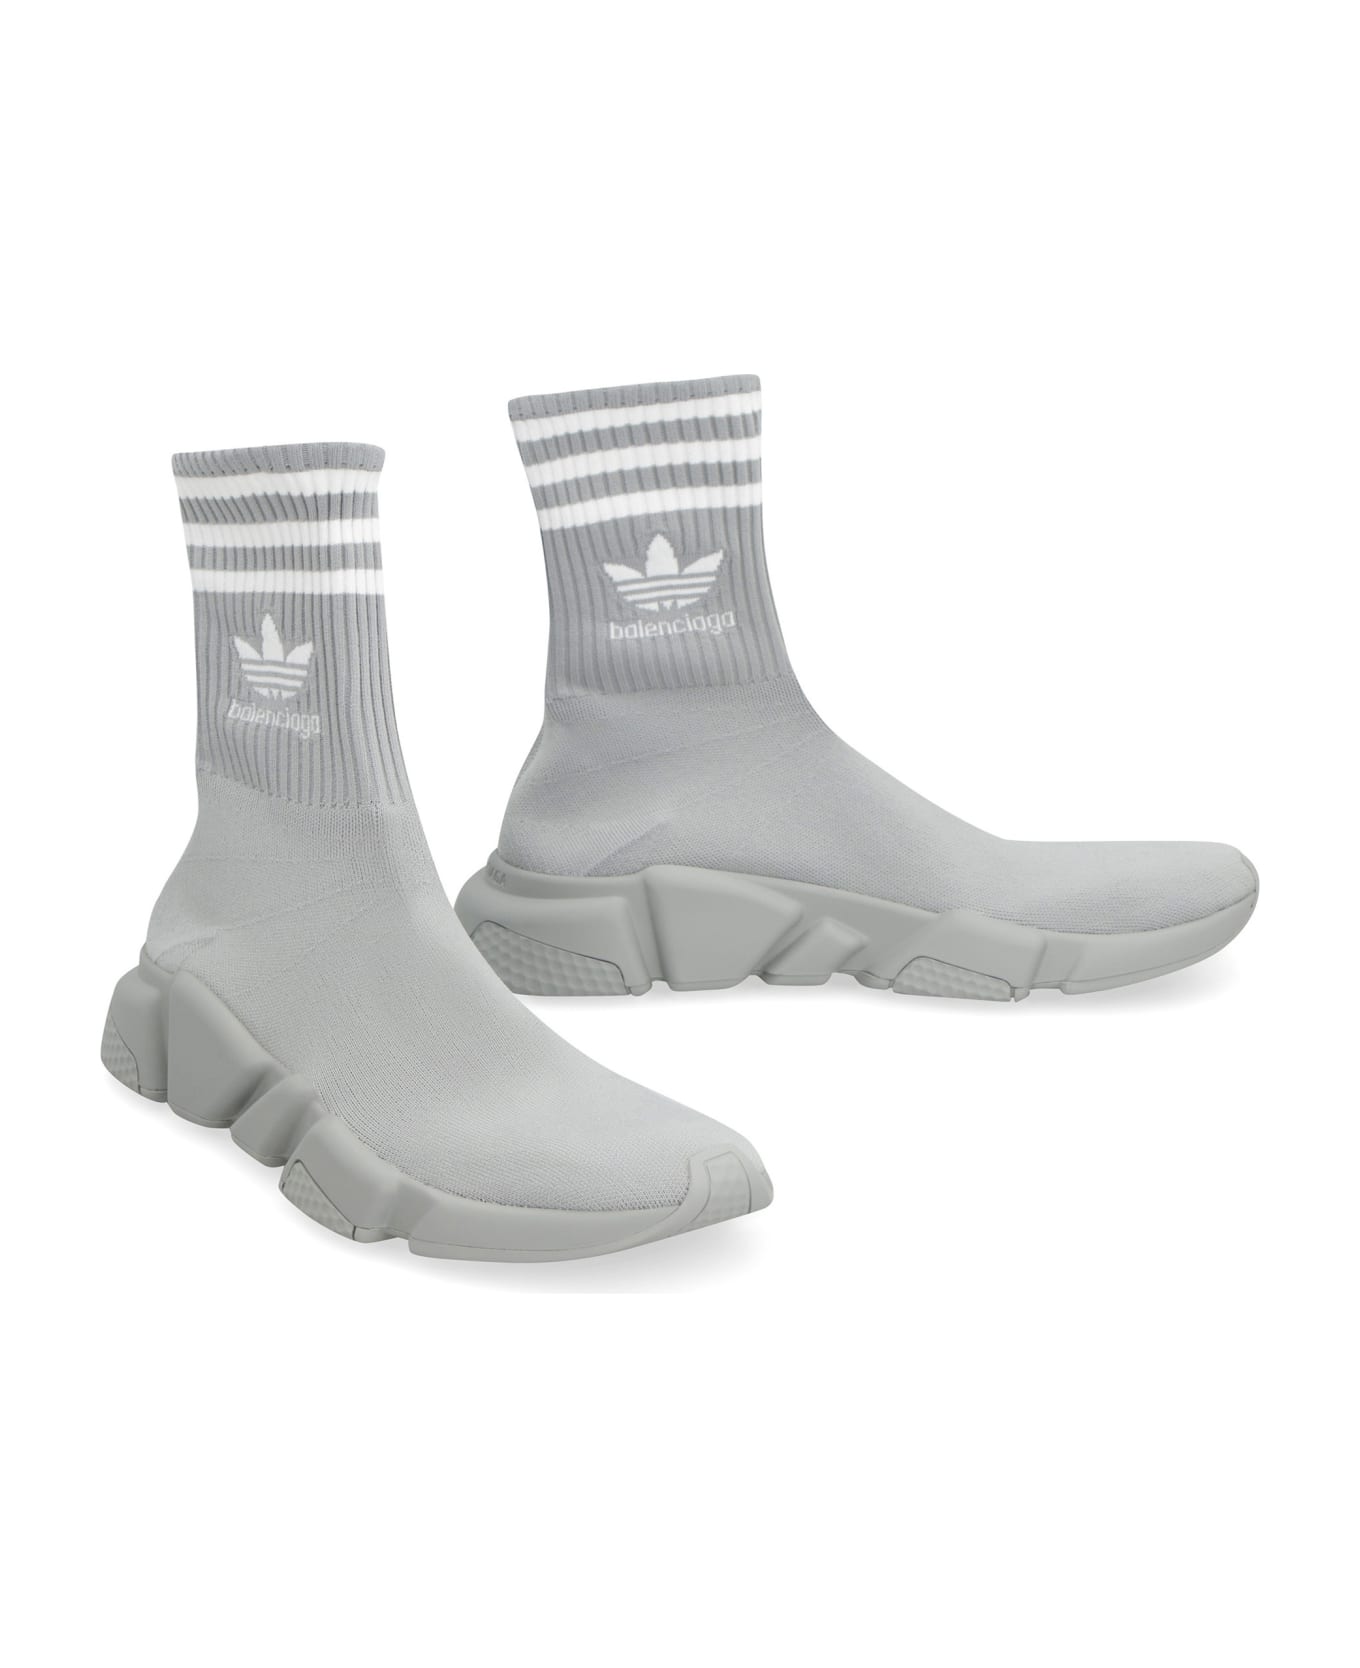 Balenciaga X Adidas -speed Trainers Knitted Sock-sneakers - grey